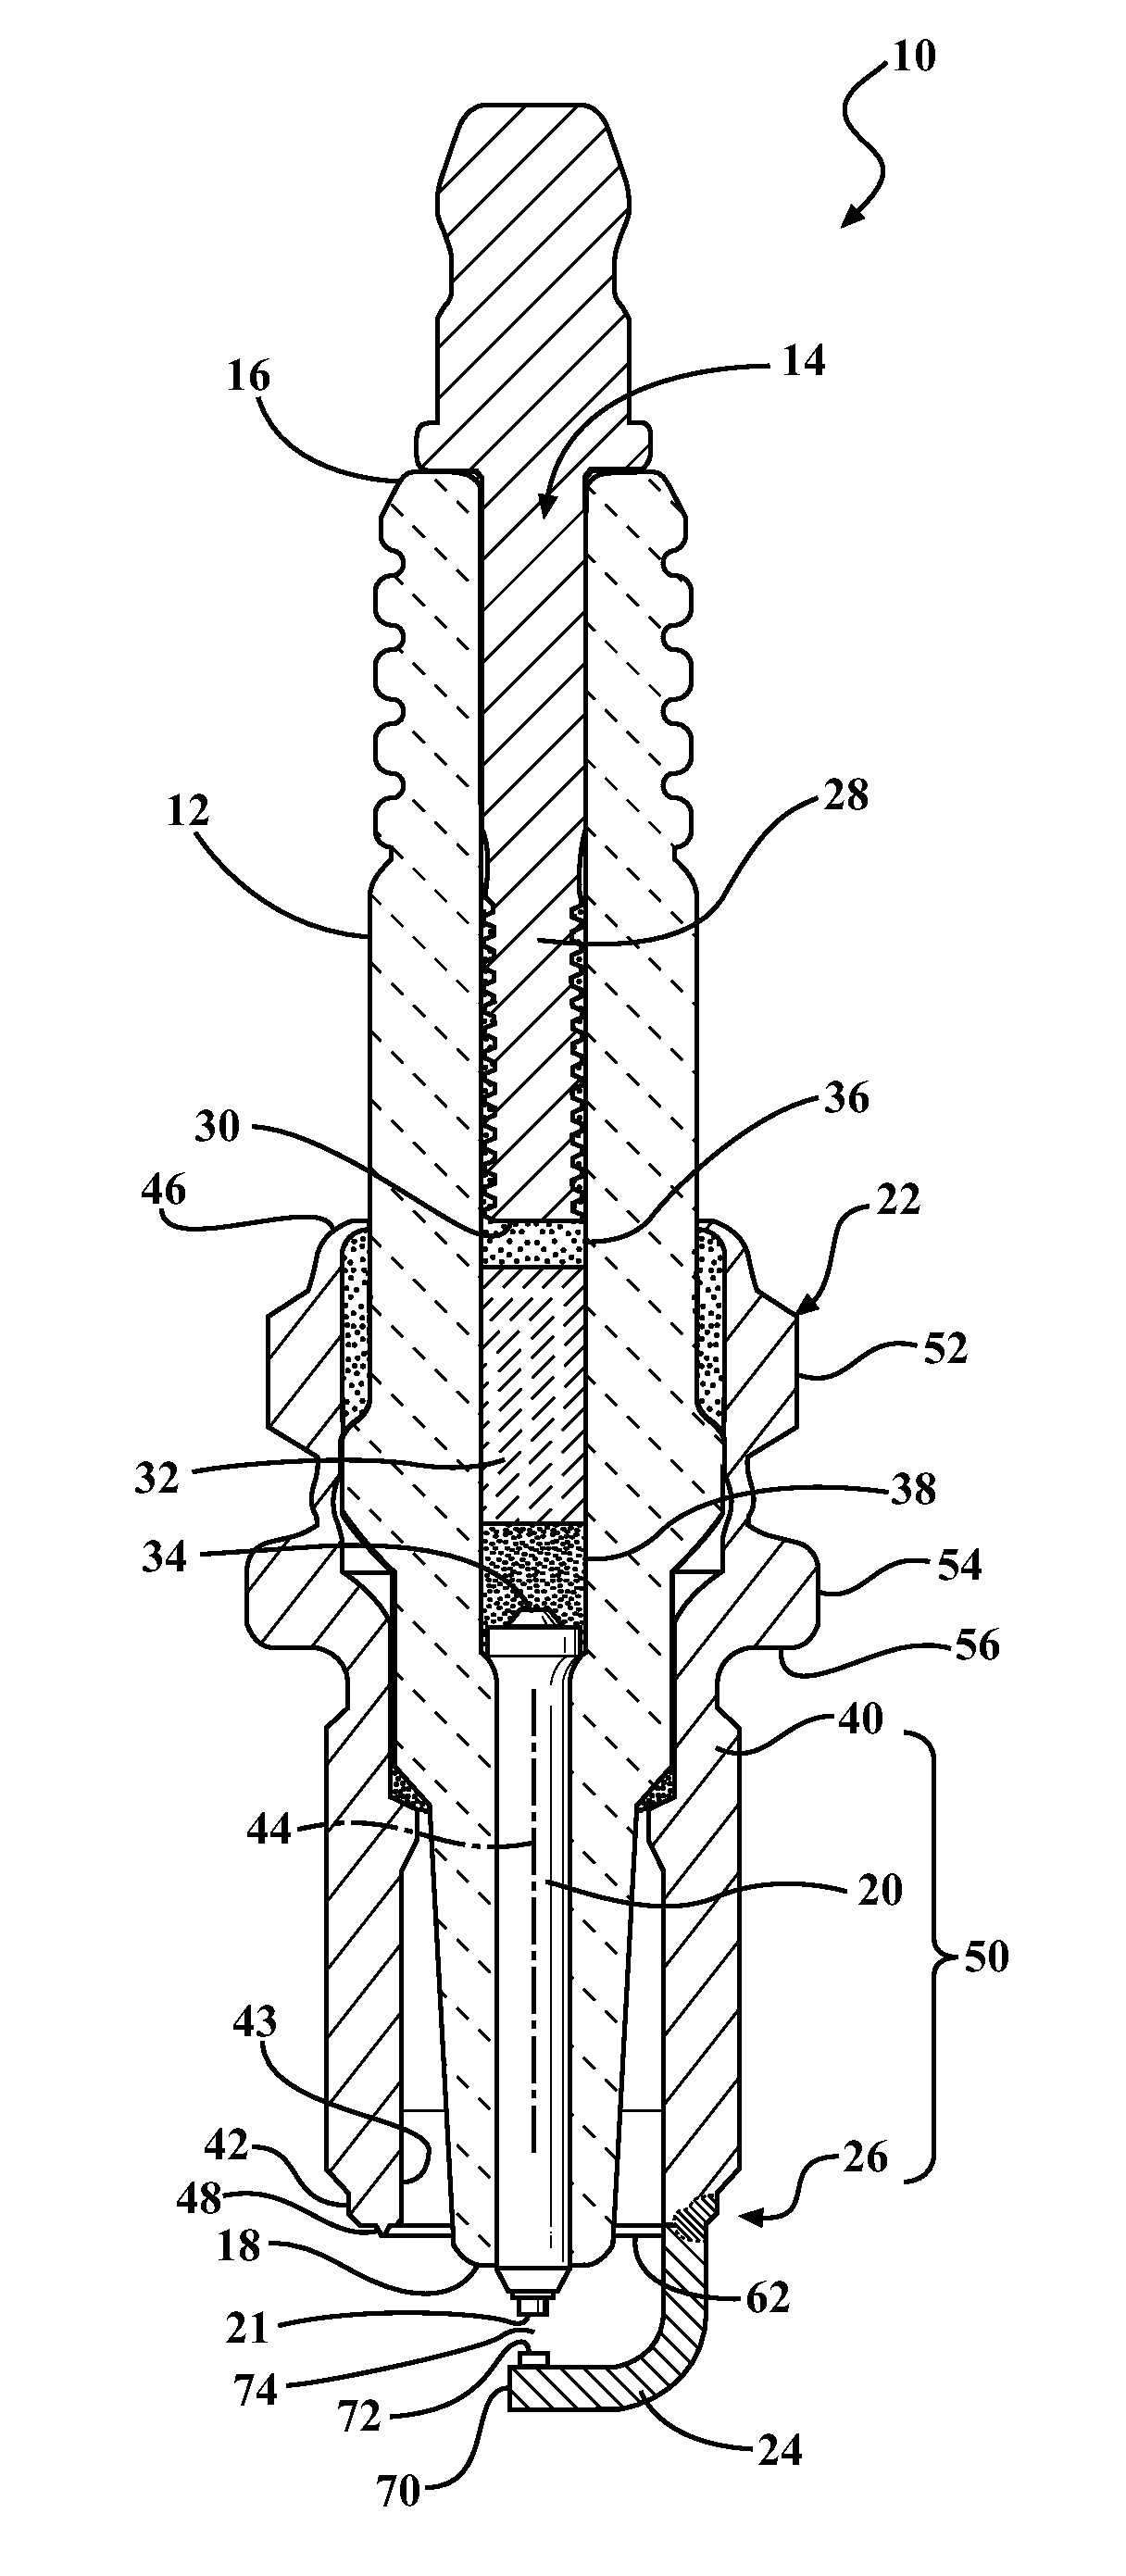 Spark ignition device for an internal combustion engine, metal shell therefor and methods of construction thereof